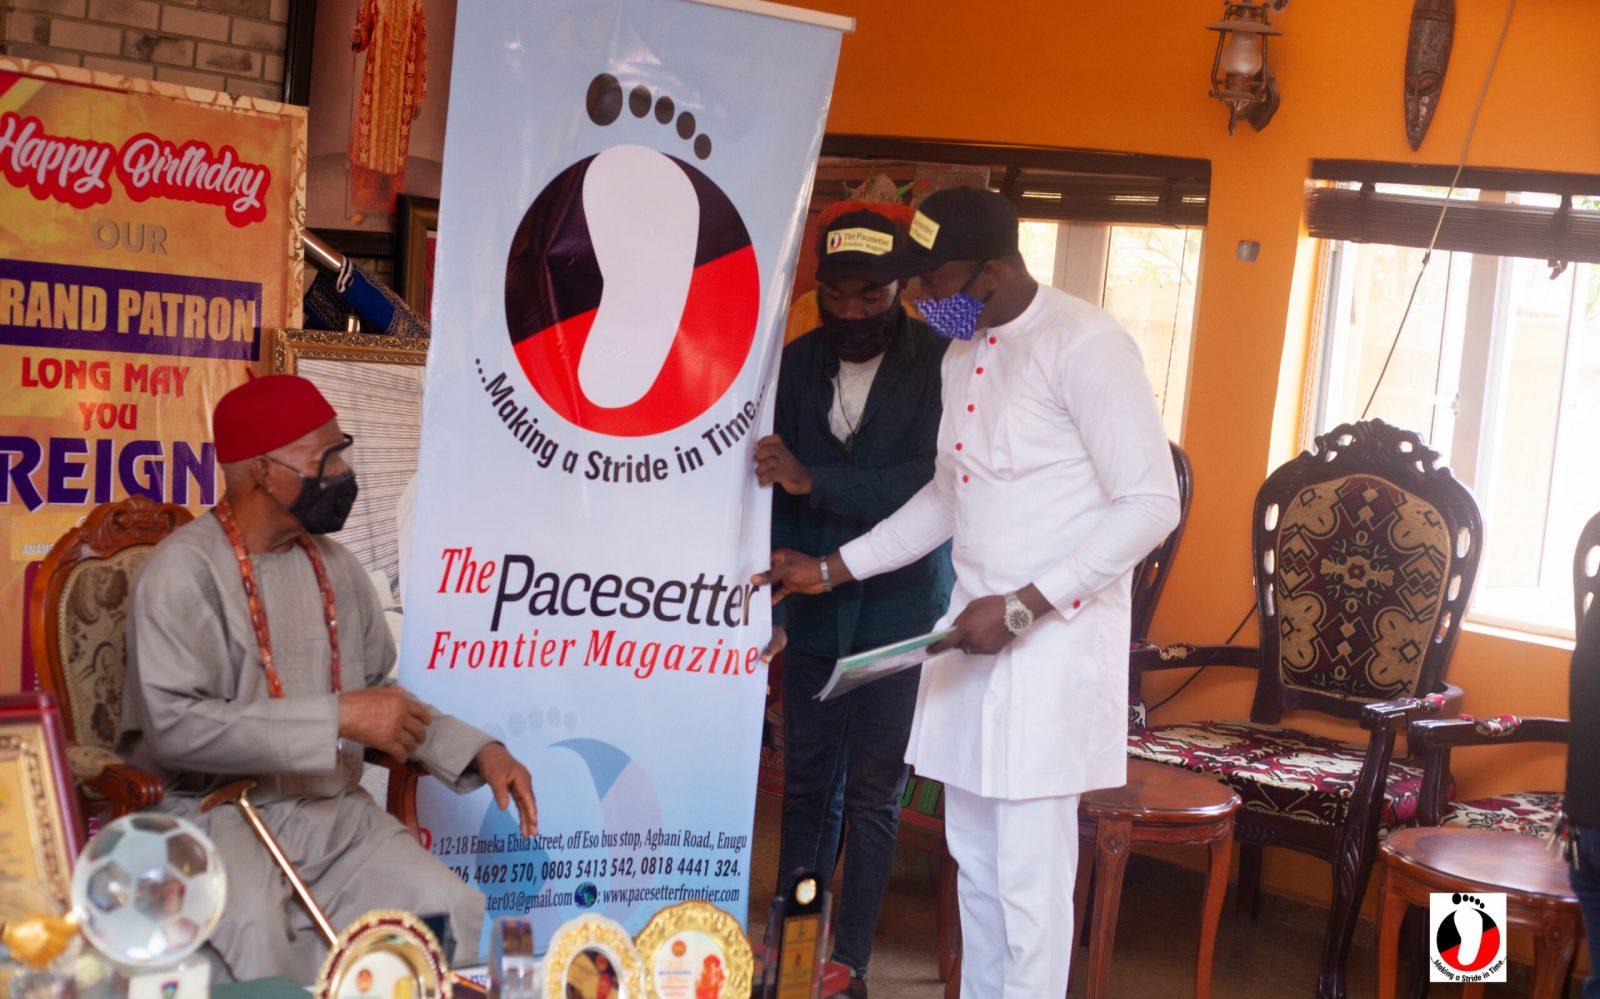 The Pacesetter Frontier Magazine Visits Obi of Otolo and Igwe of Nnewi.